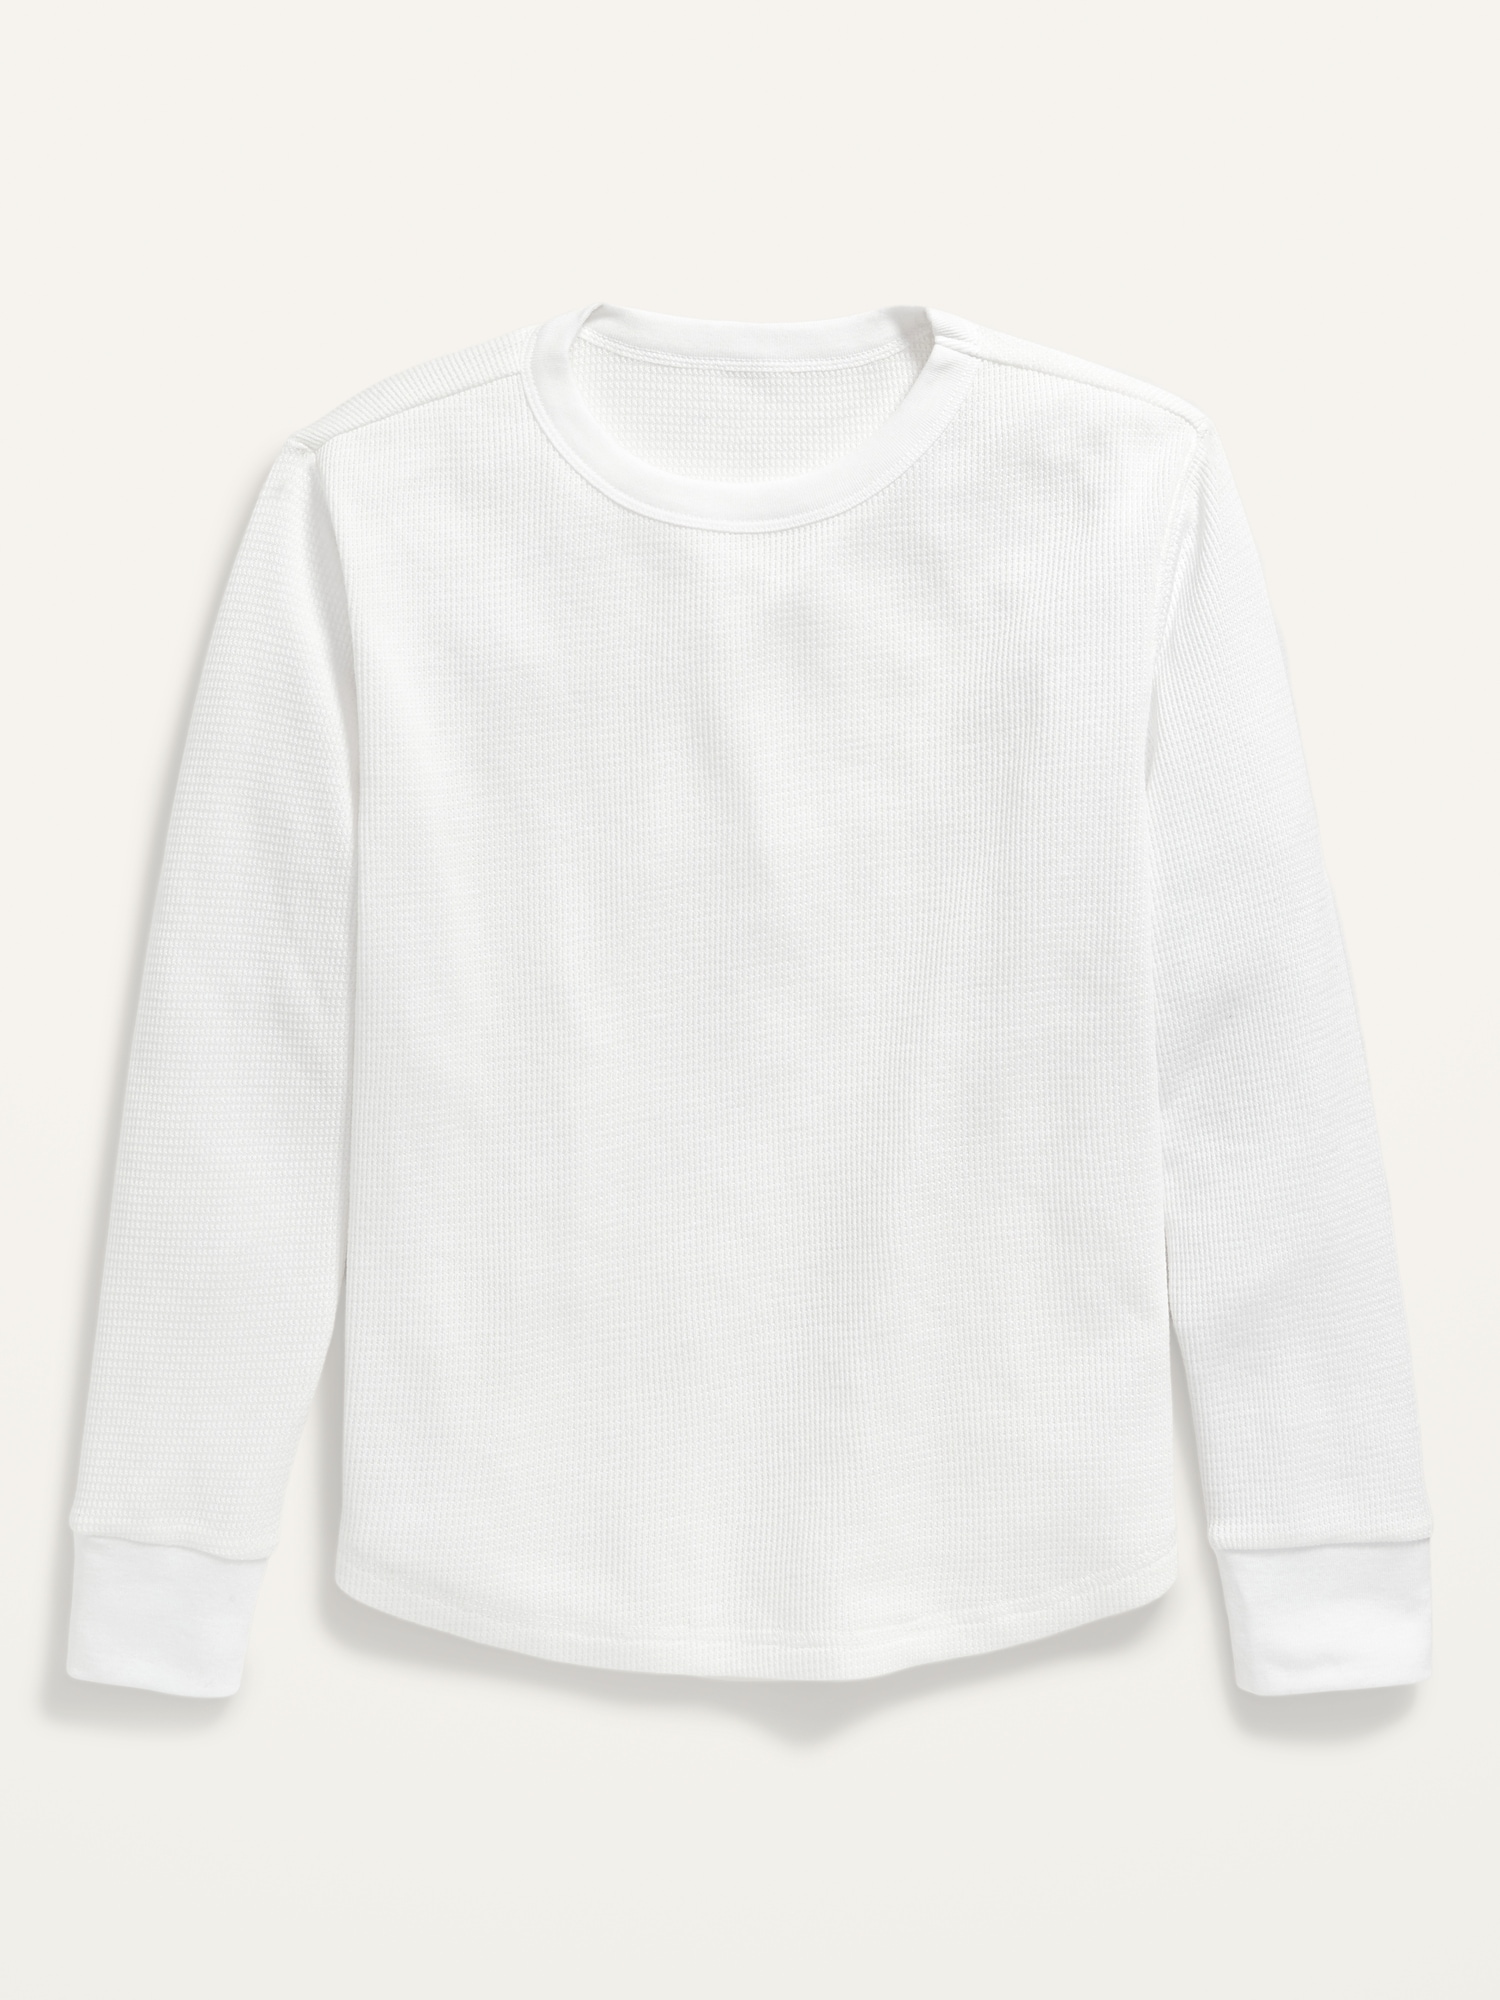 Long-Sleeve Thermal-Knit T-Shirt For Boys | Old Navy